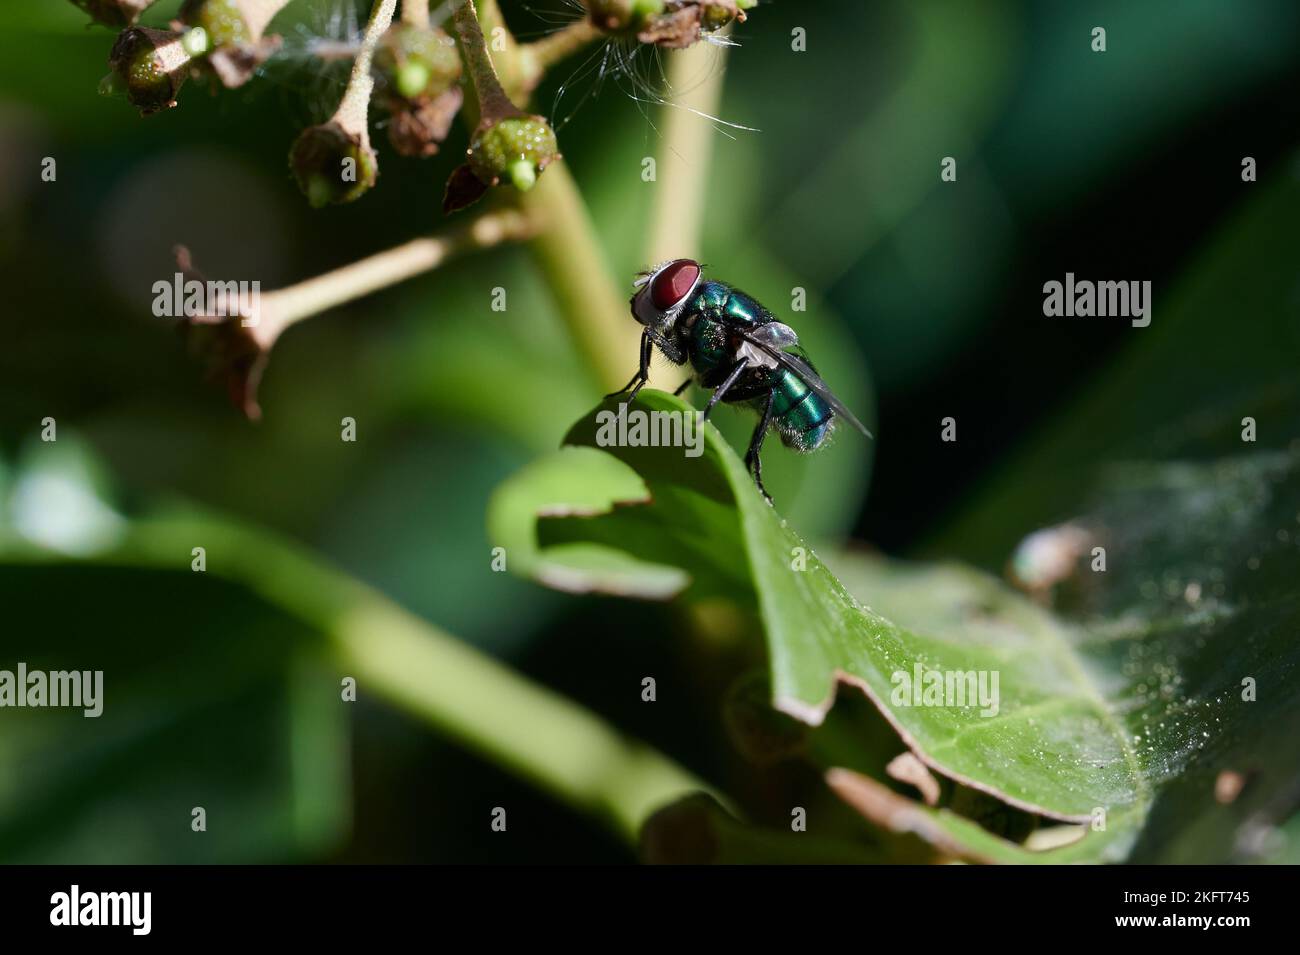 Closeup of fly sitting on green leaf of plant near cobwebs against blurred background Stock Photo